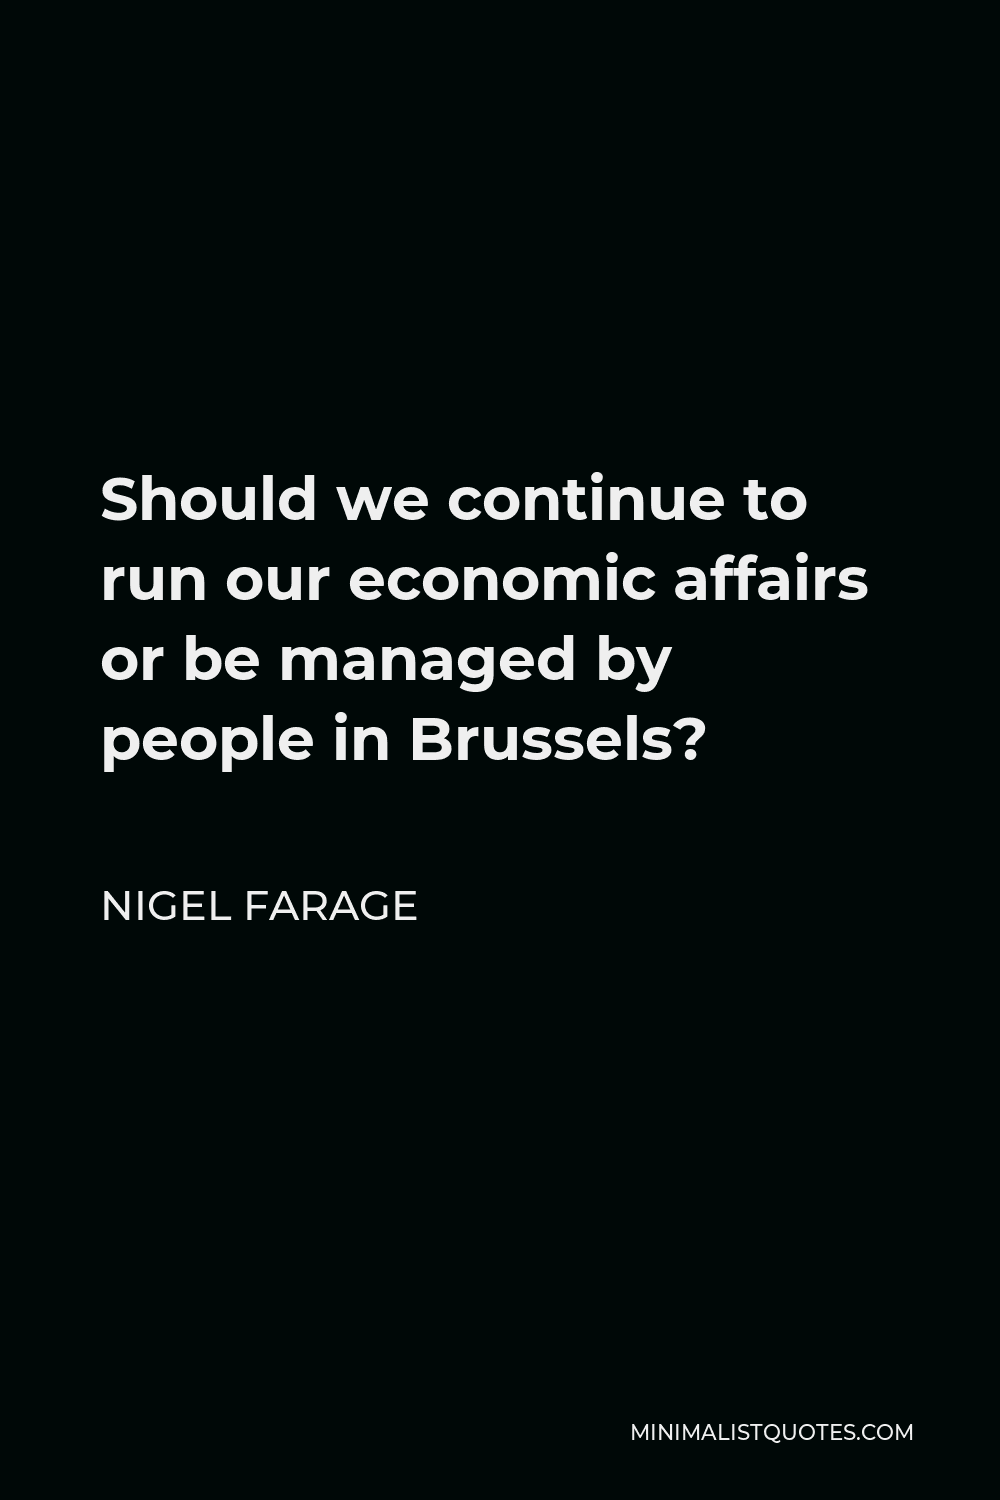 Nigel Farage Quote - Should we continue to run our economic affairs or be managed by people in Brussels?